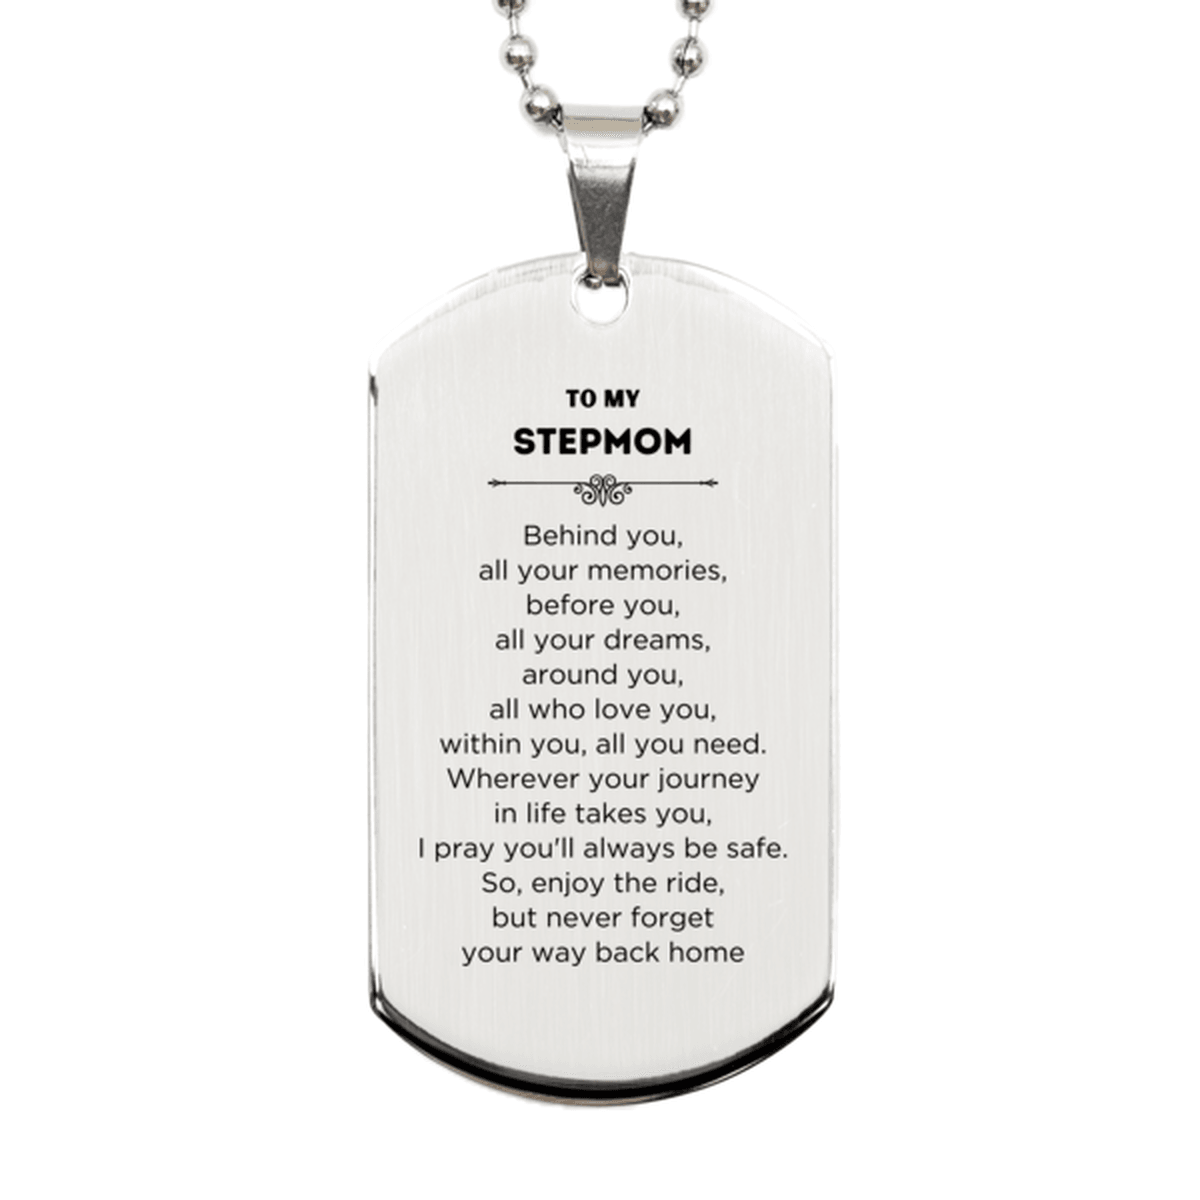 Stepmom Silver Dog Tag Necklace Birthday Christmas Unique Gifts Behind you, all your memories, before you, all your dreams - Mallard Moon Gift Shop